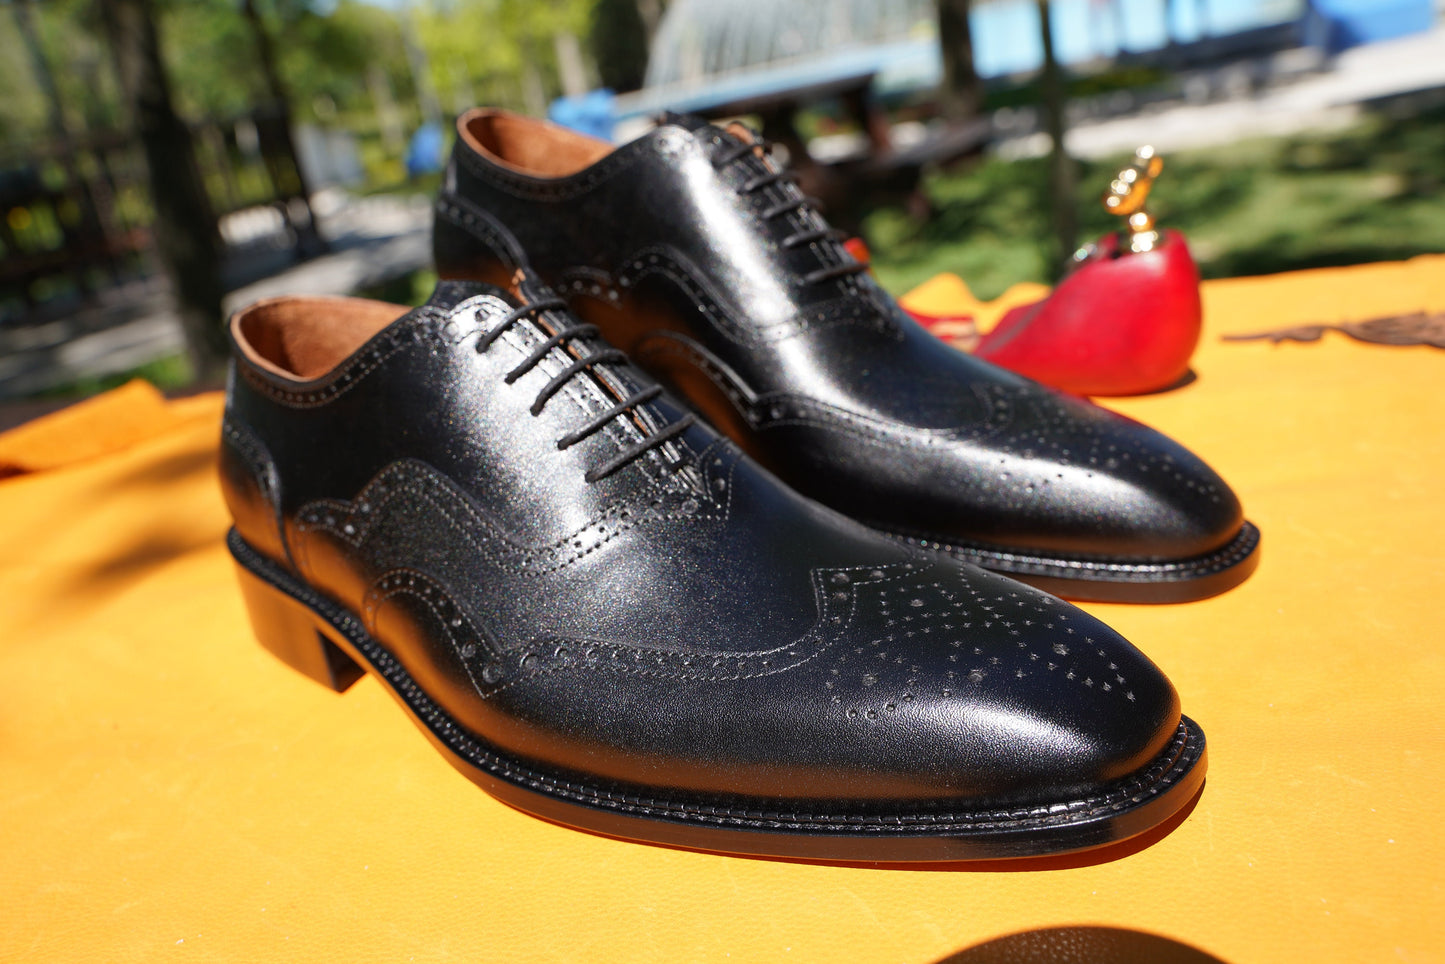 Whole Cut Black Oxford Wing Tip Men Shoes Leather Handmade Customized Made To Order Shoes Men Oxford Shoes Casual Shoes Business Shoes